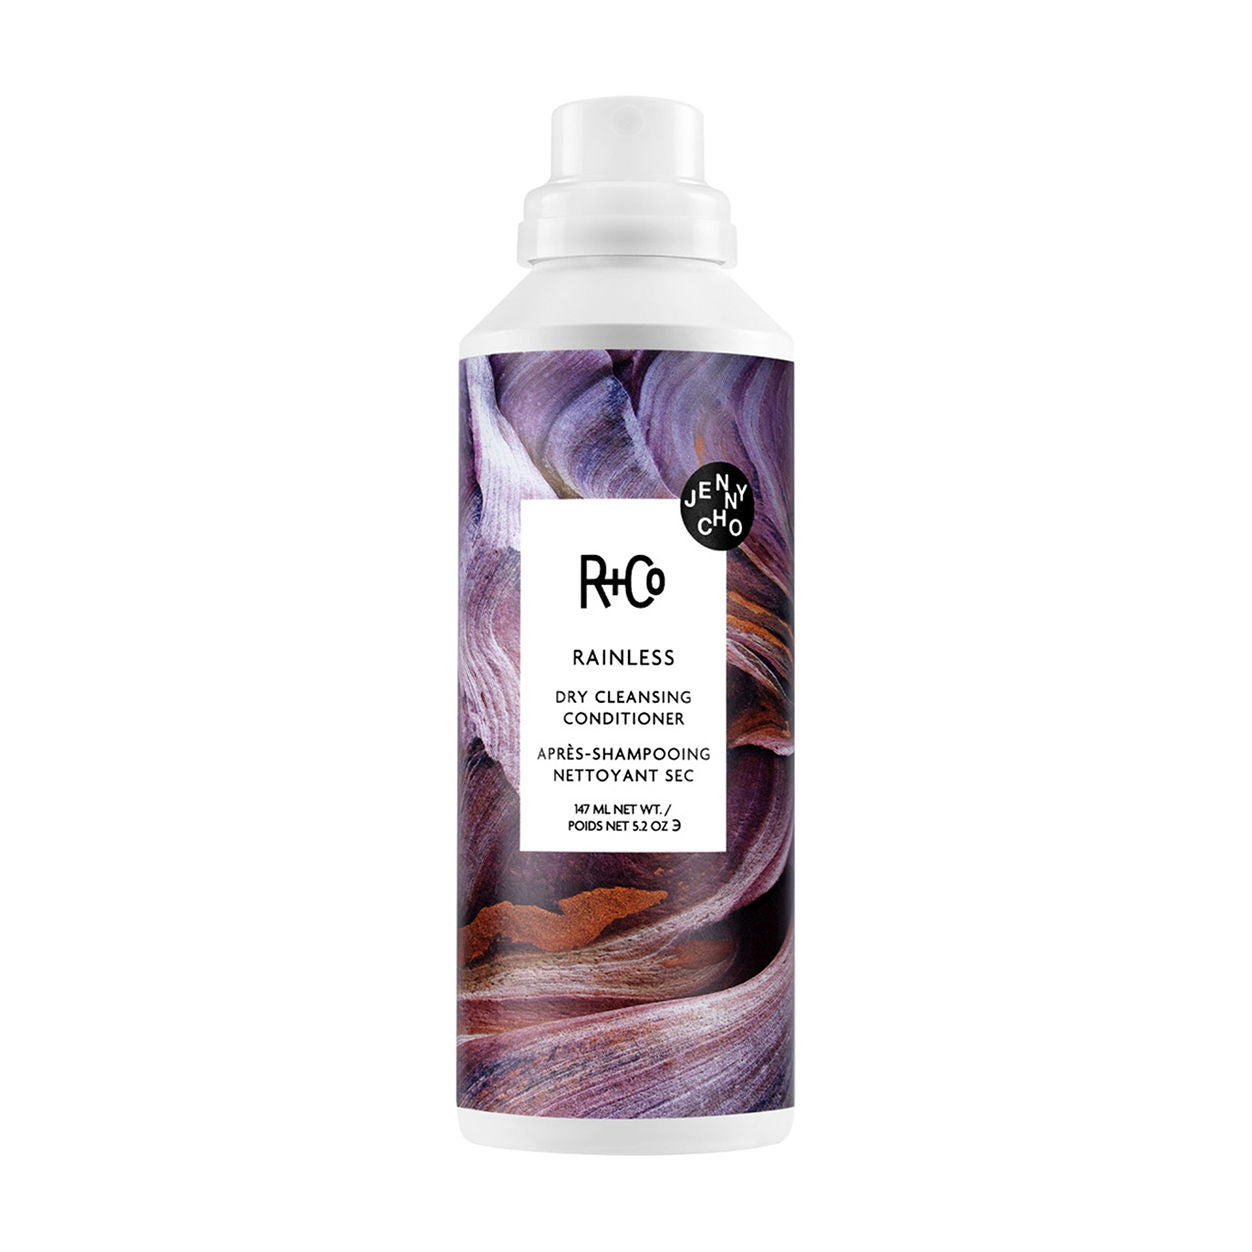 R+Co Rainless Dry Cleansing Conditioner main image